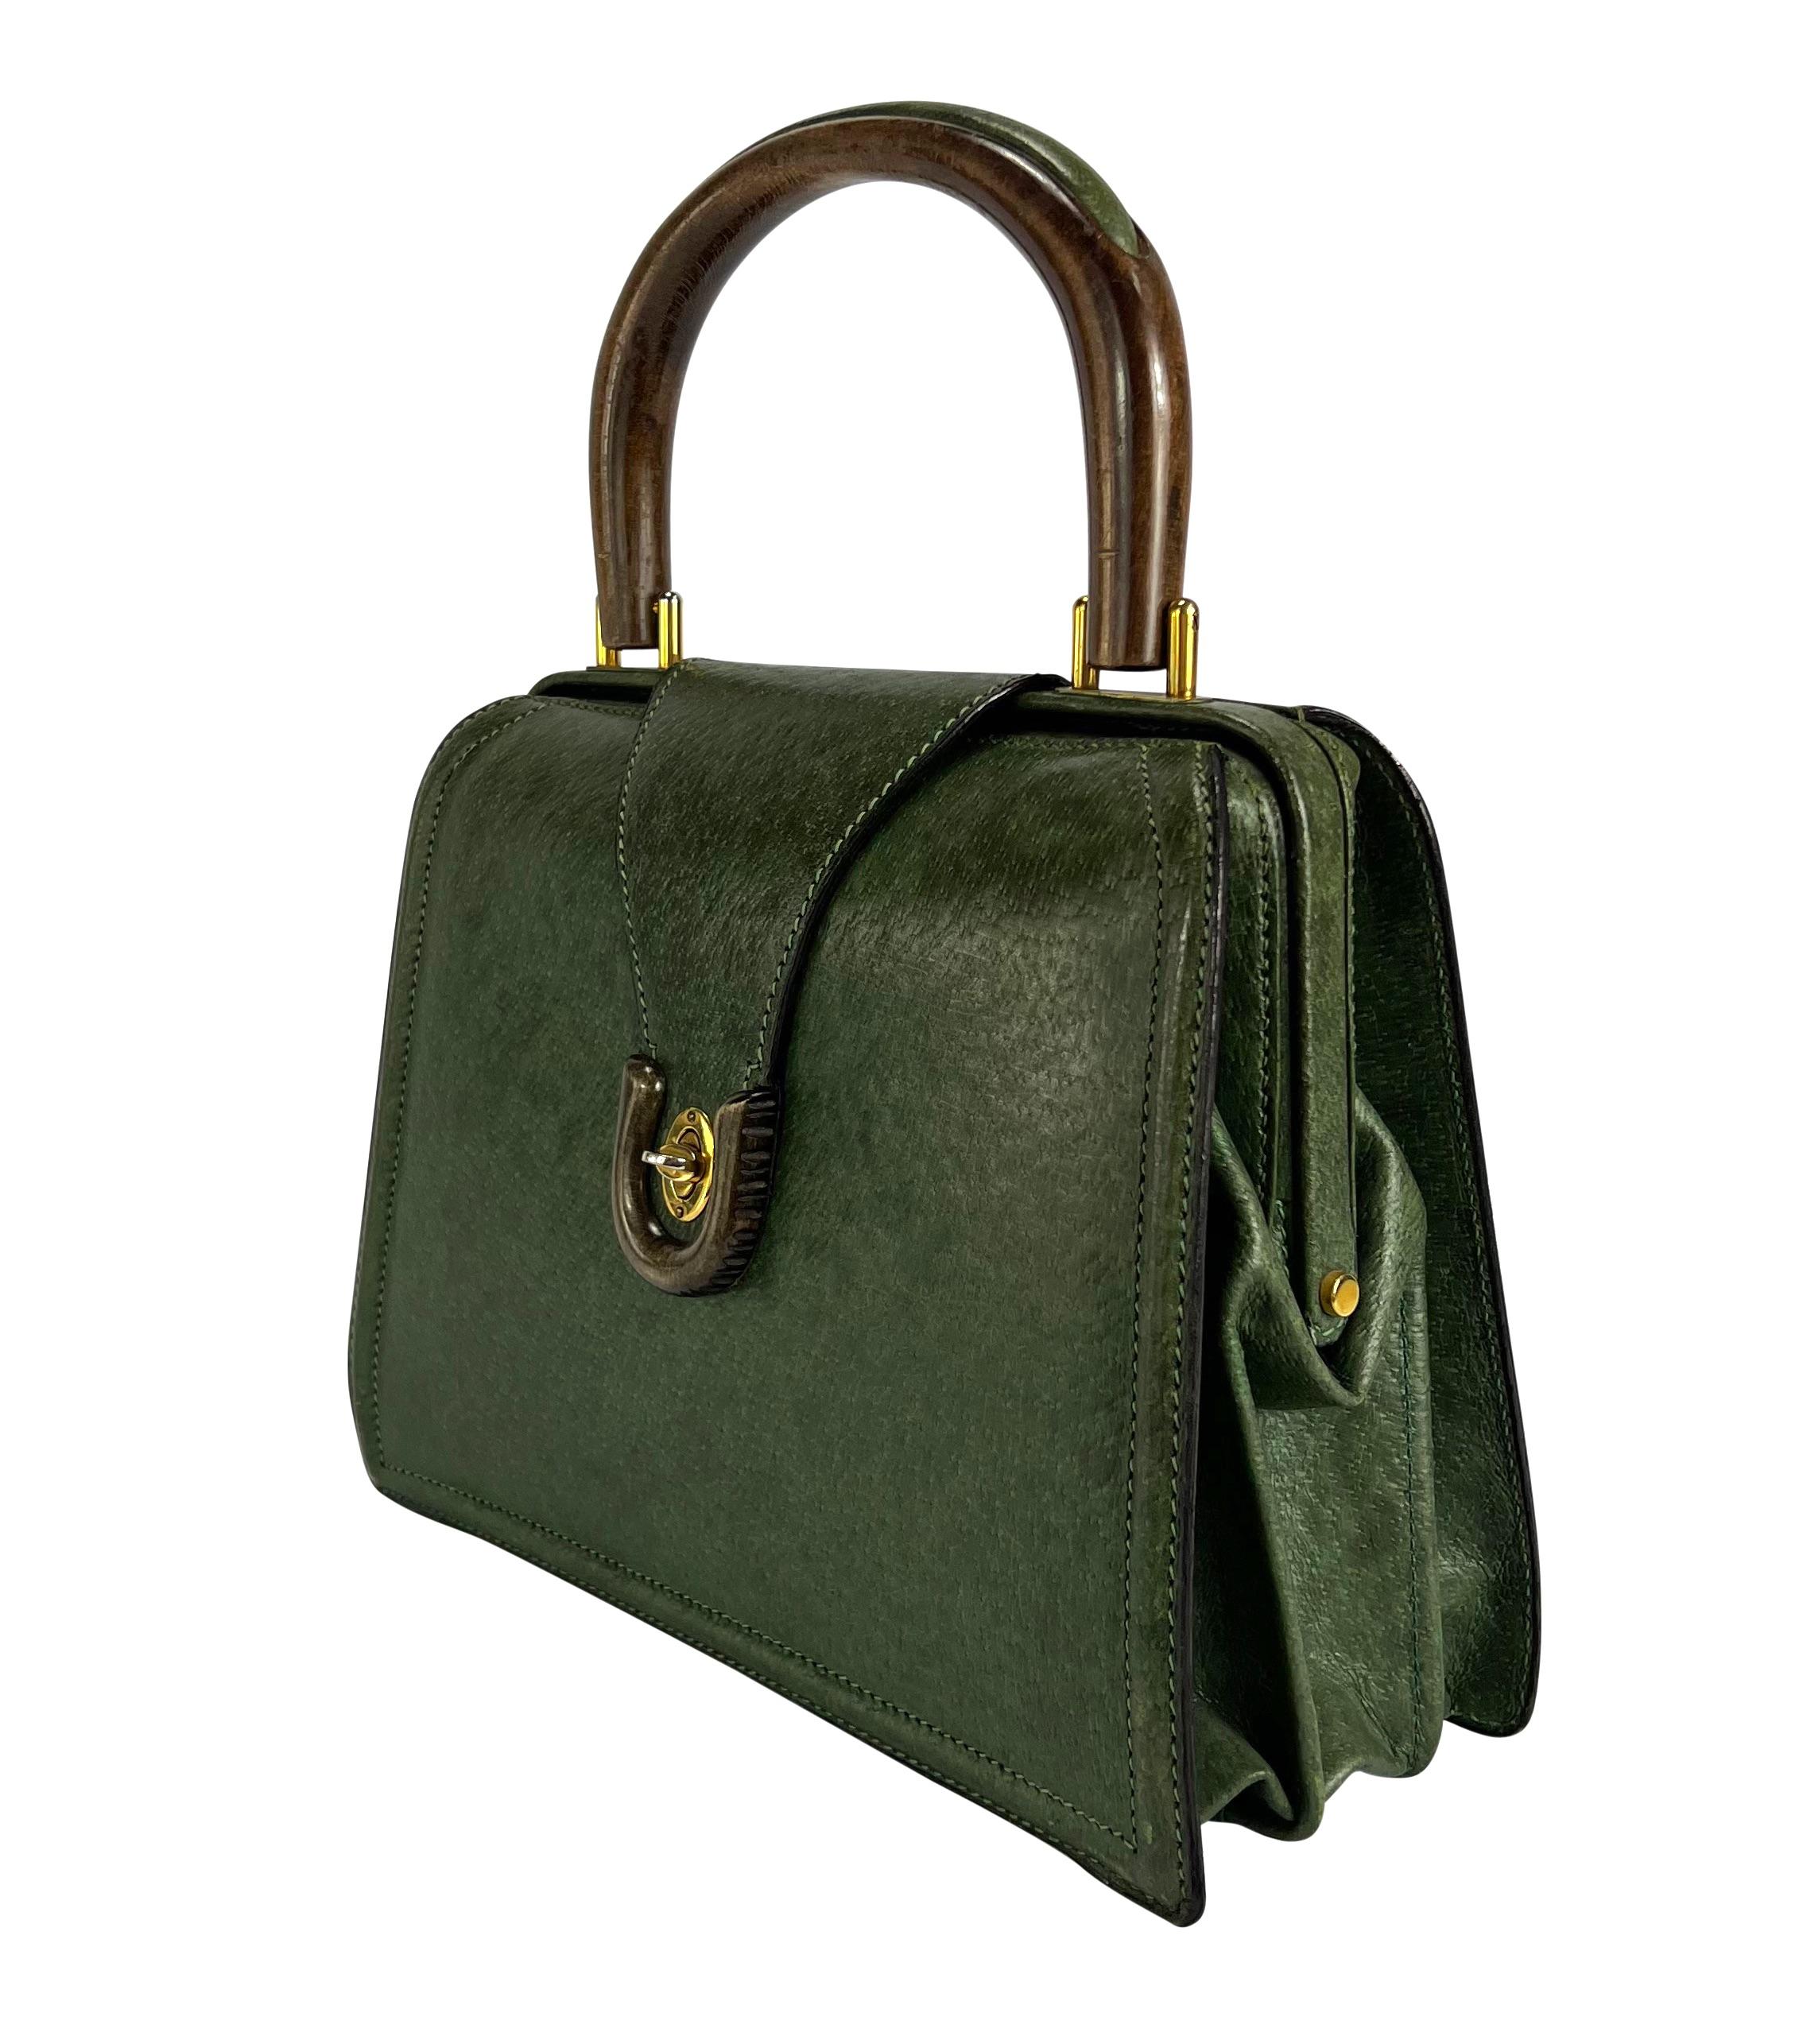 TheRealList presents: a fabulous hunter green boar leather top handle Gucci bag. From the 1960s, this fabulous accordion-style bag features gold-tone hardware, a wooden handle, and a flap closure secured with a turn lock. Add this unique and